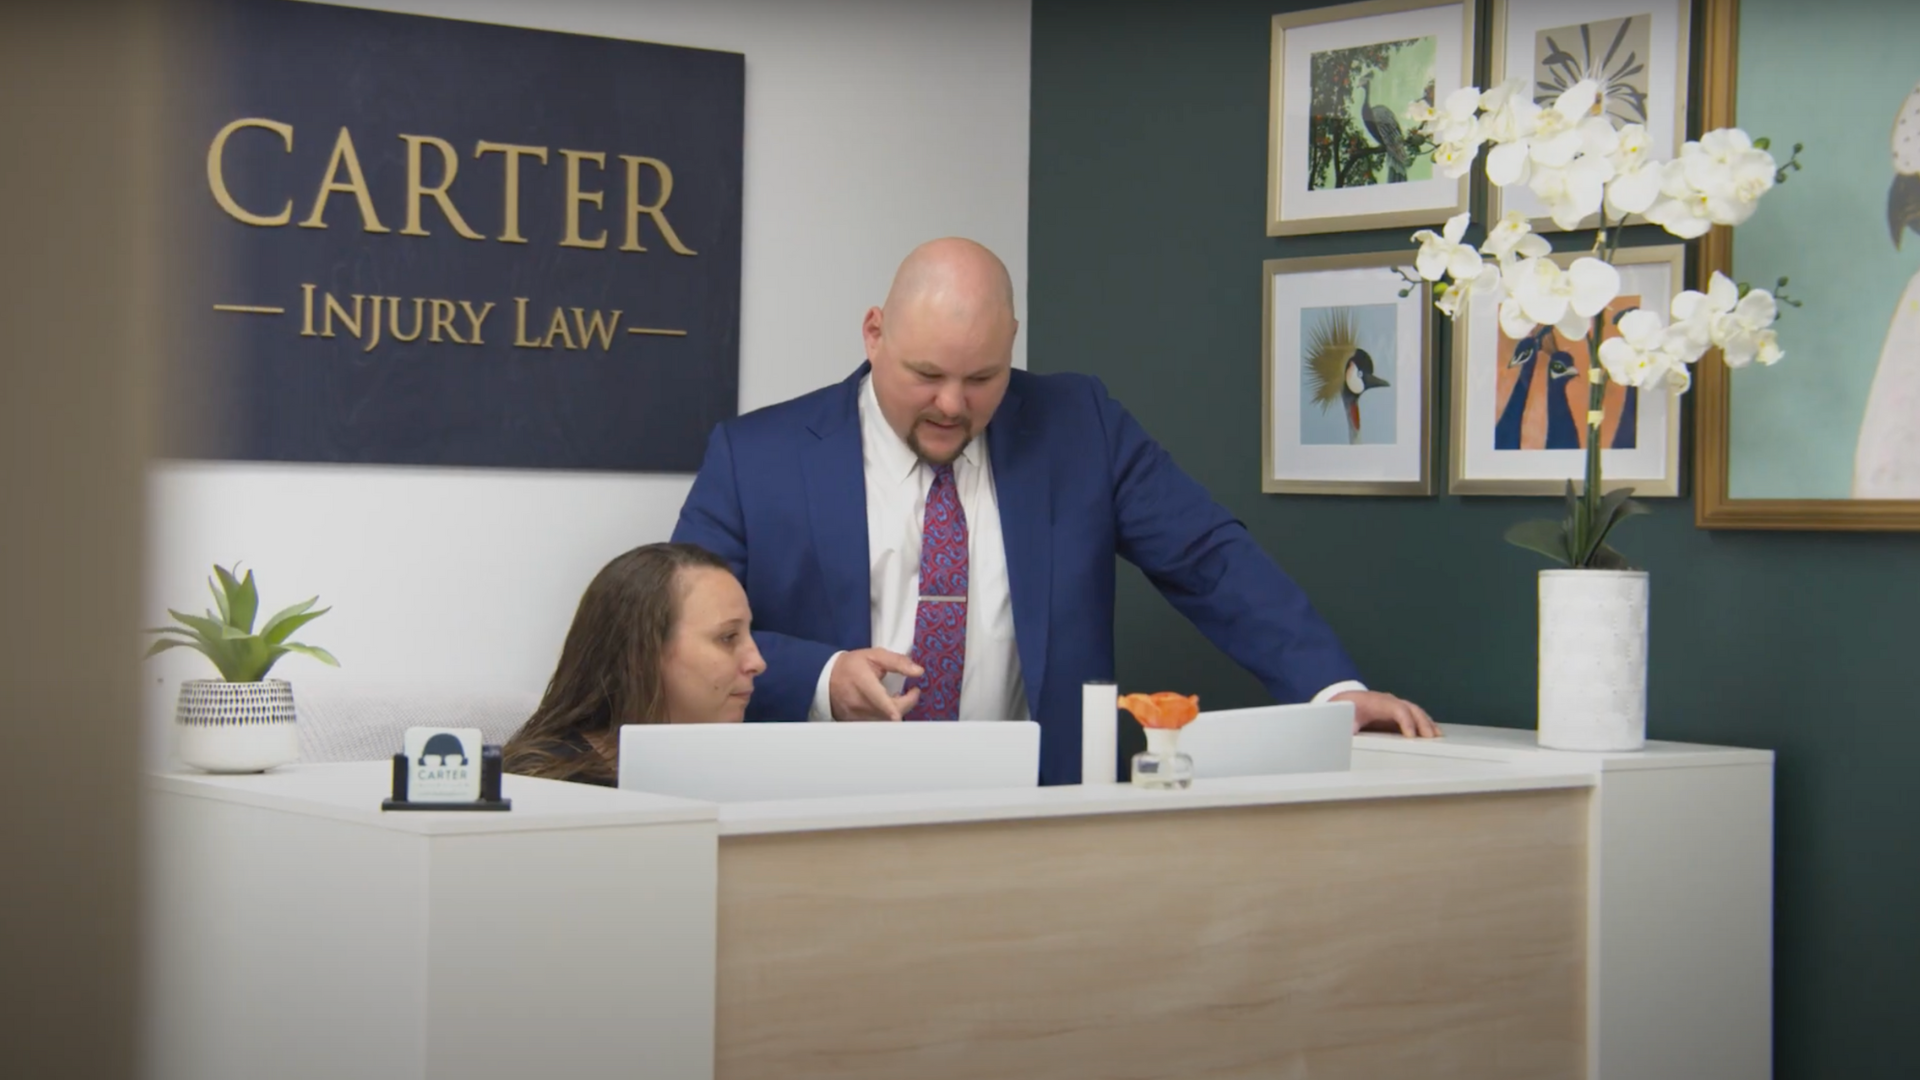 Tampa Bay Law Office Commercial - Carter Law